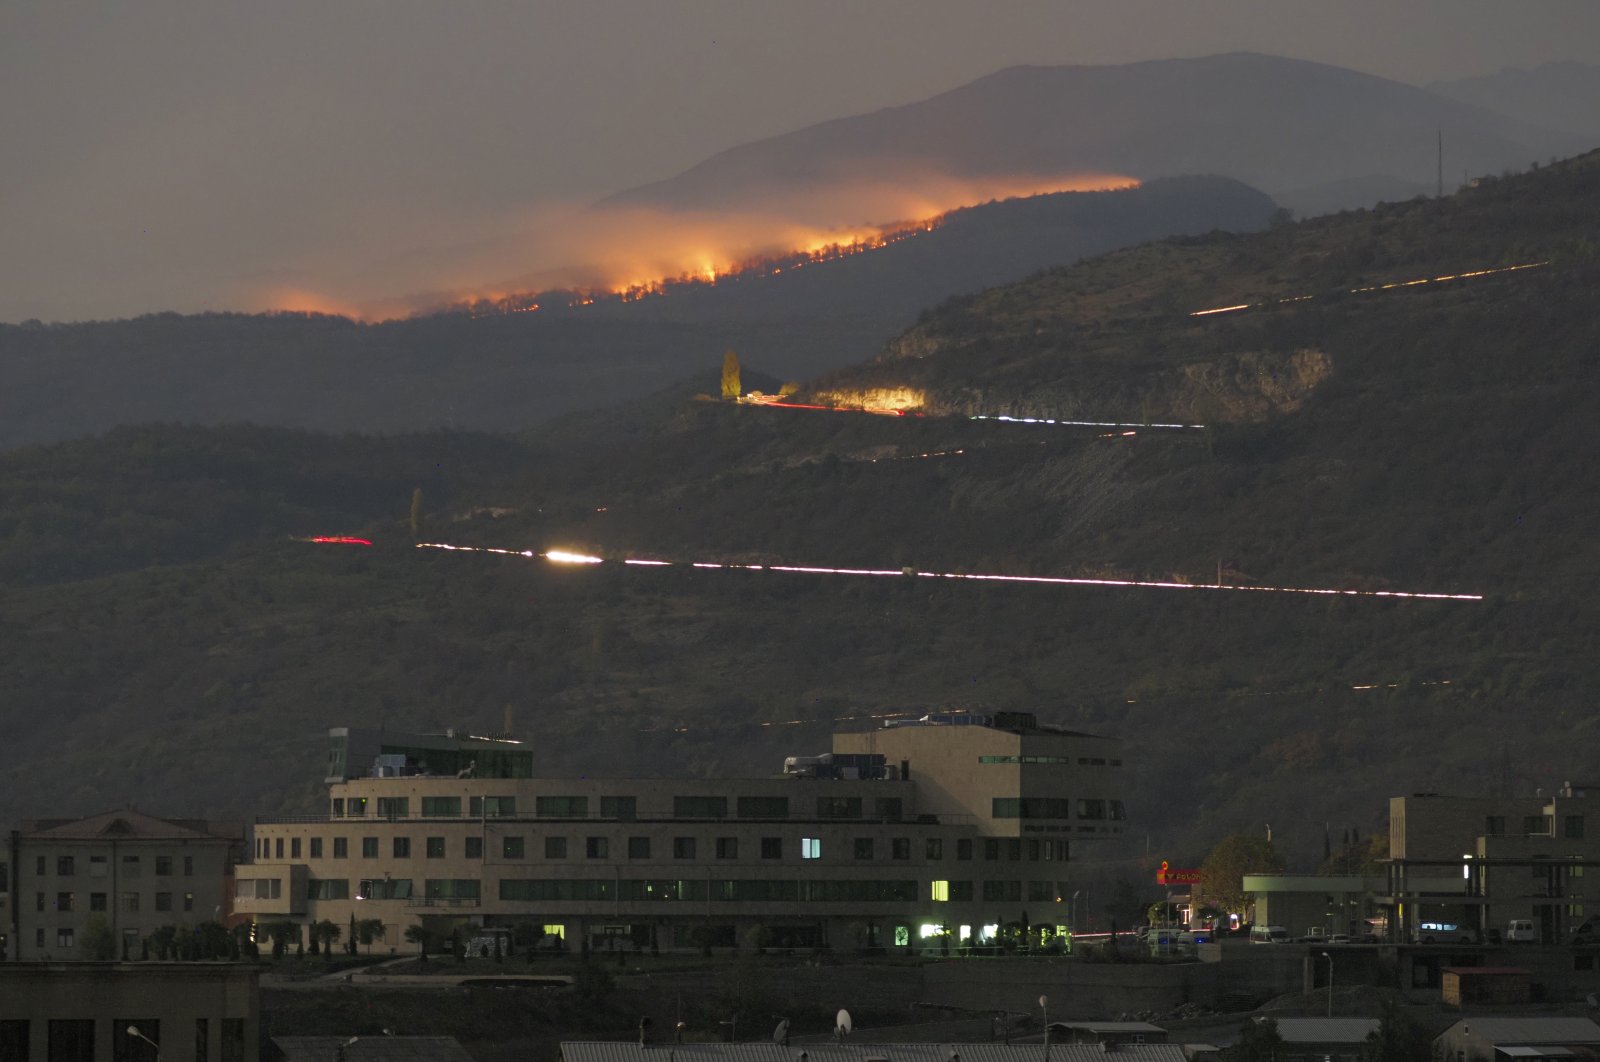 Forest burns in the mountains during a military conflict outside Stepanakert (Khankendi), the Armenian-occupied region of Nagorno-Karabakh, Oct. 30, 2020. (AP Photo)